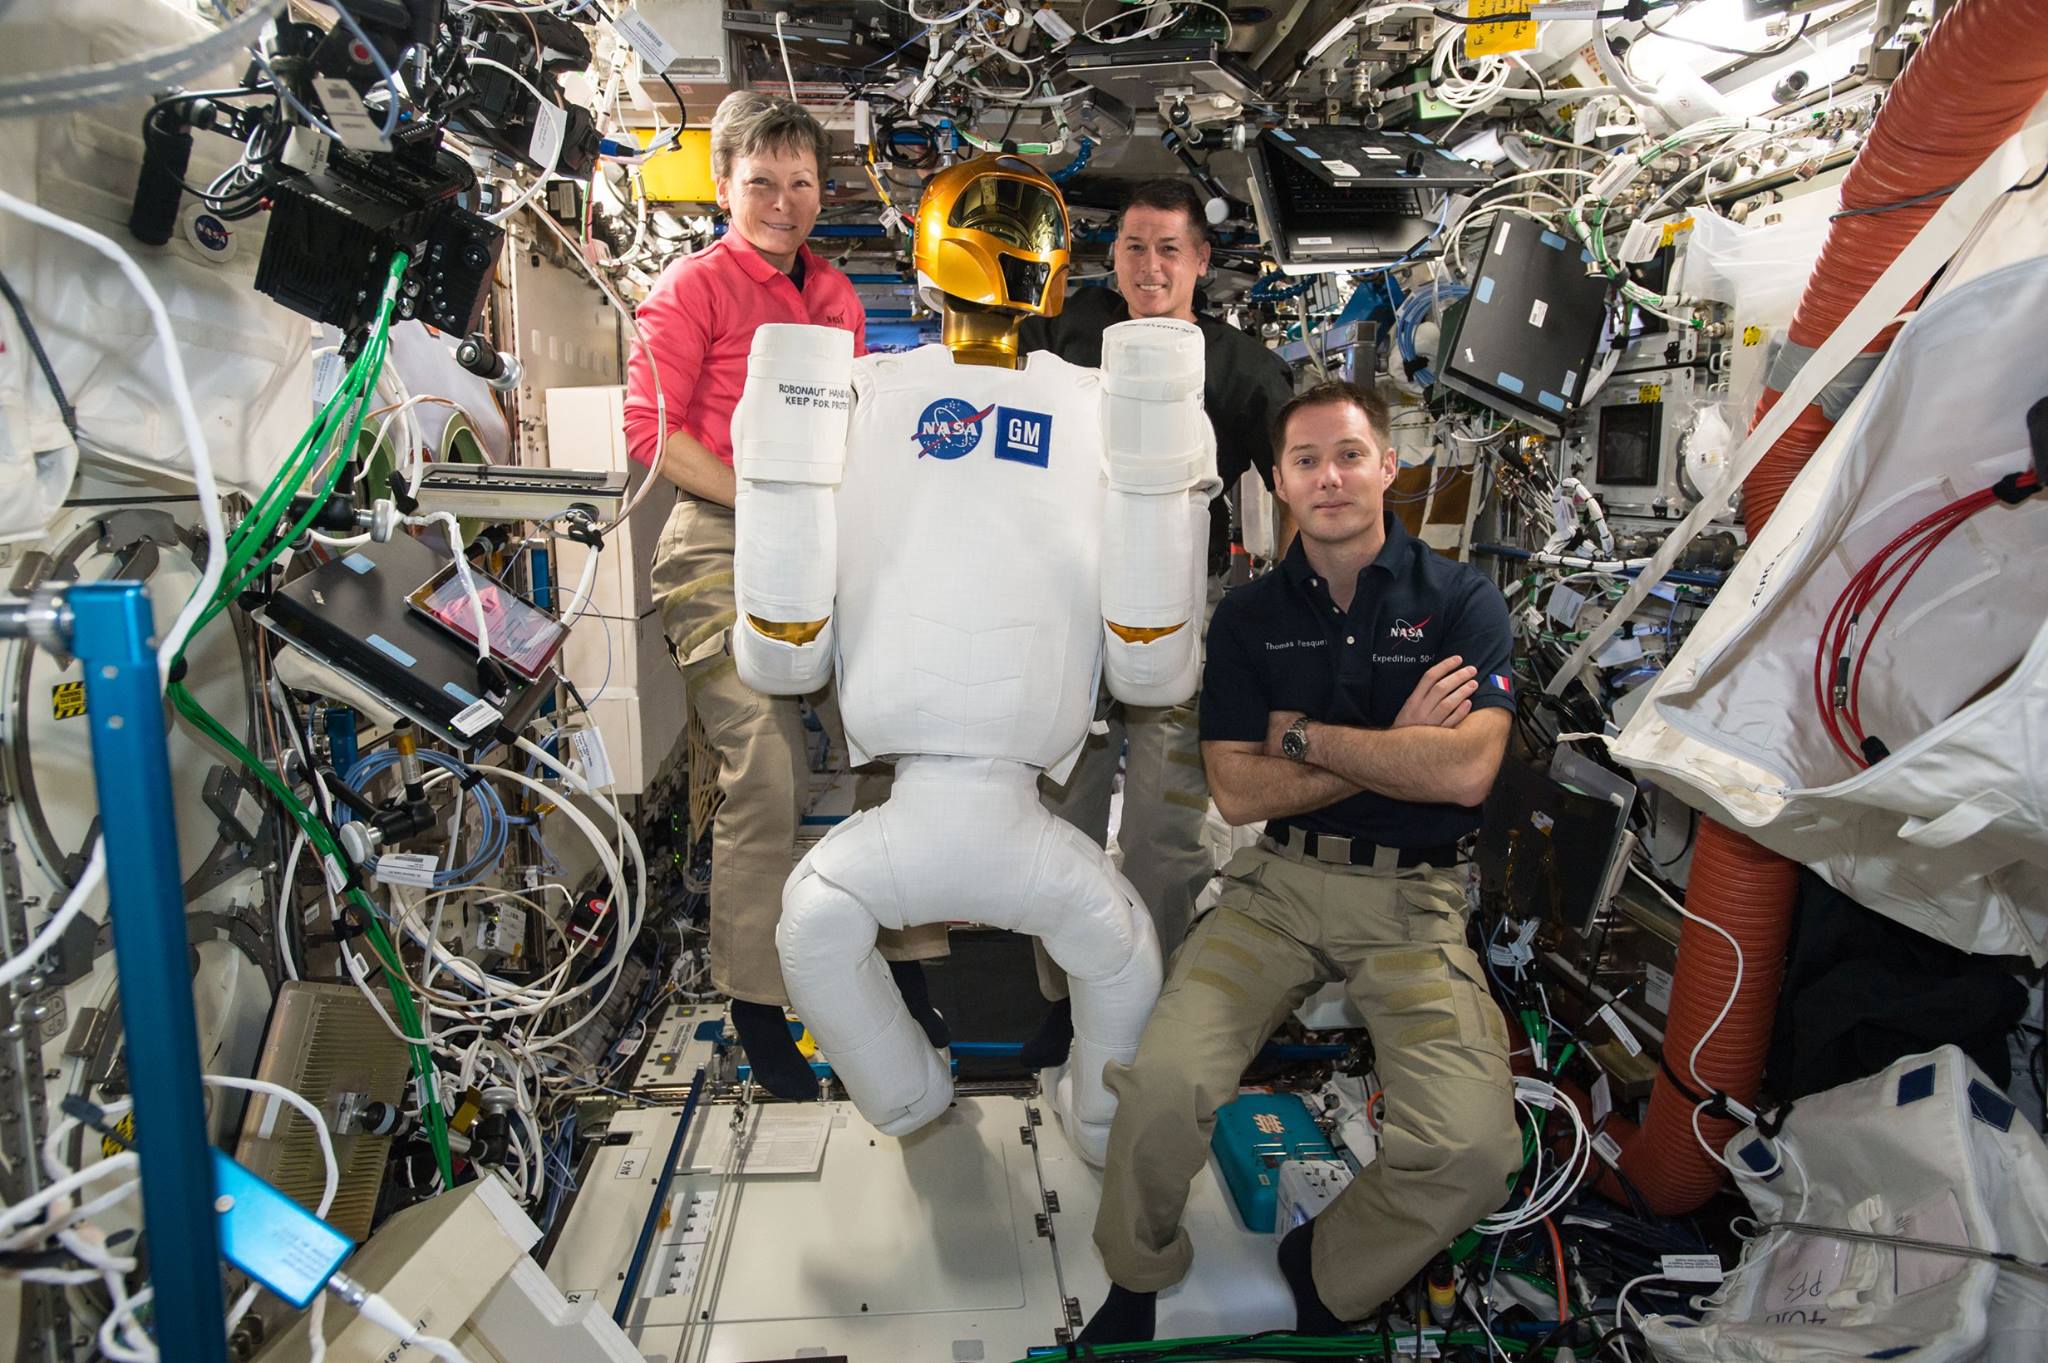 which work with nasa robonaut 2 engineers